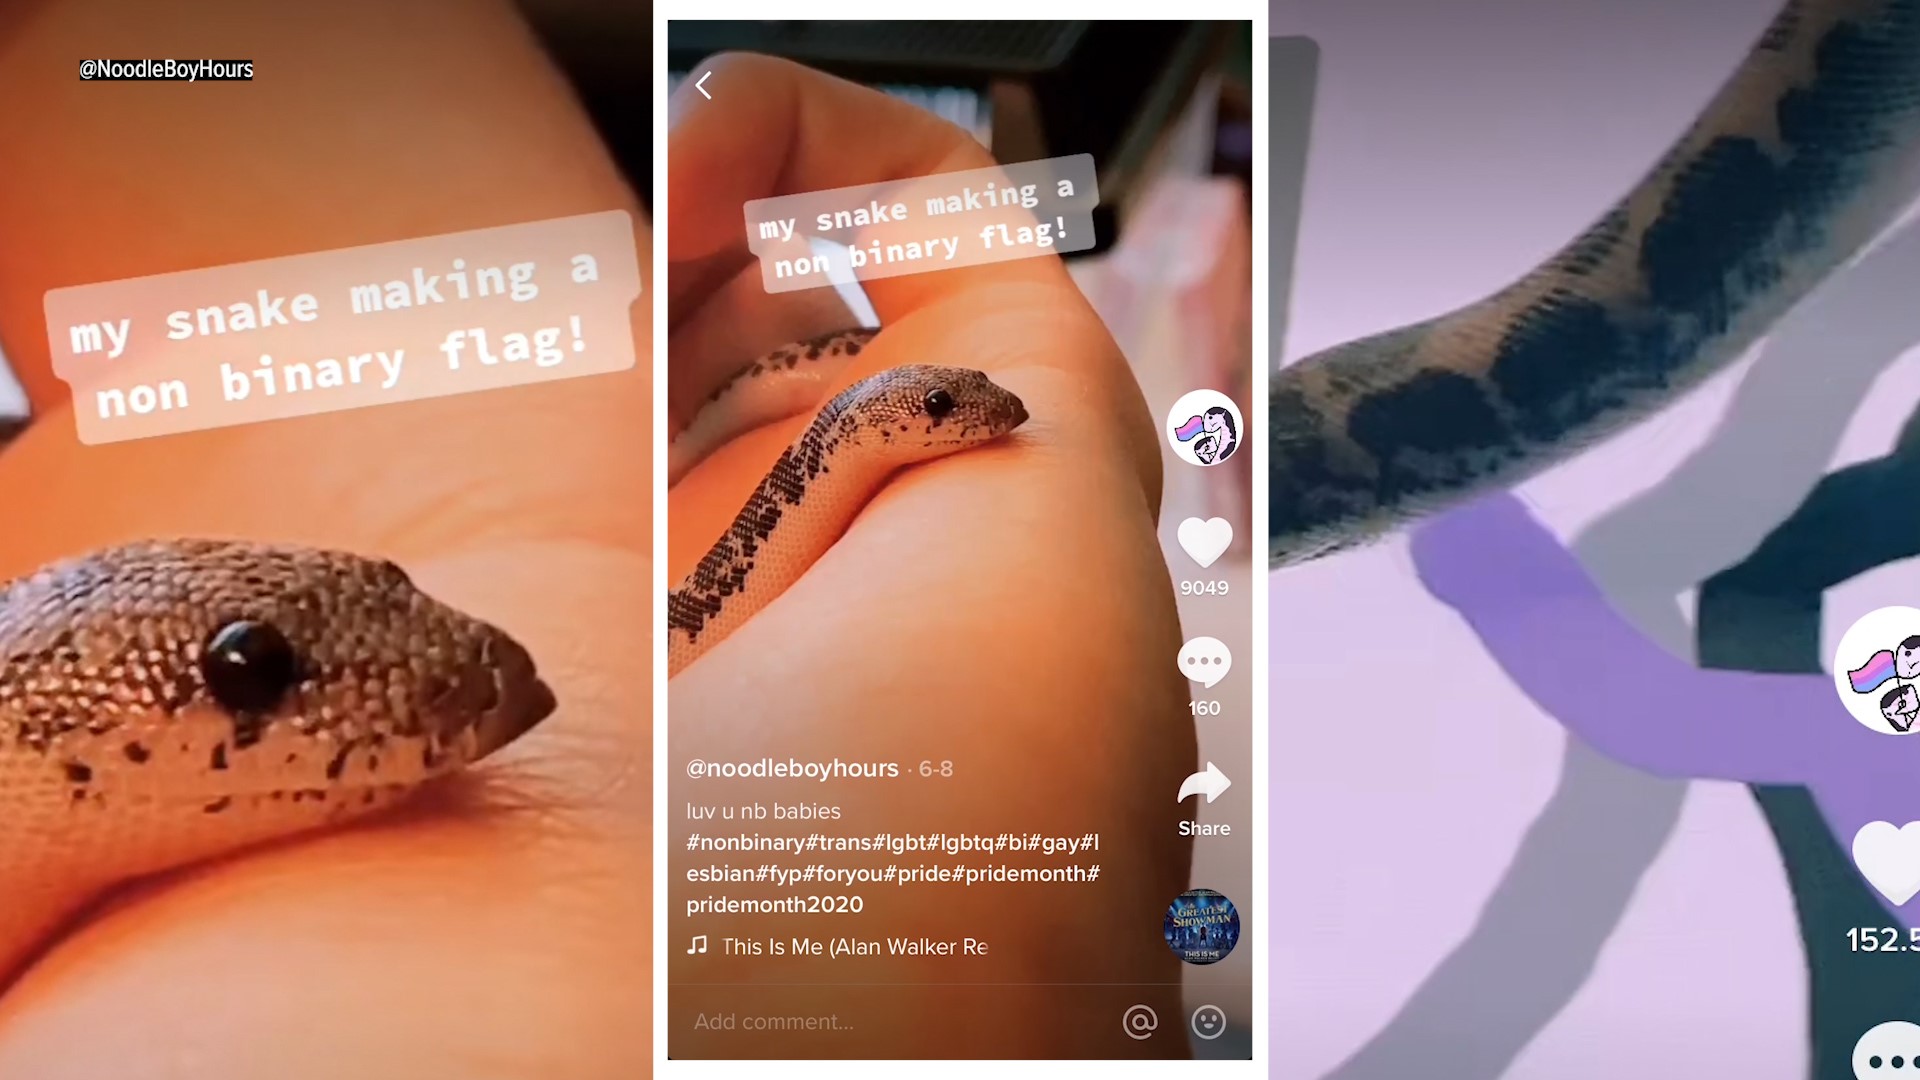 With over 200 thousand followers on TikTok, 15 year old Lilly Jane creates videos with her baby snake to promote positivity and inclusivity.